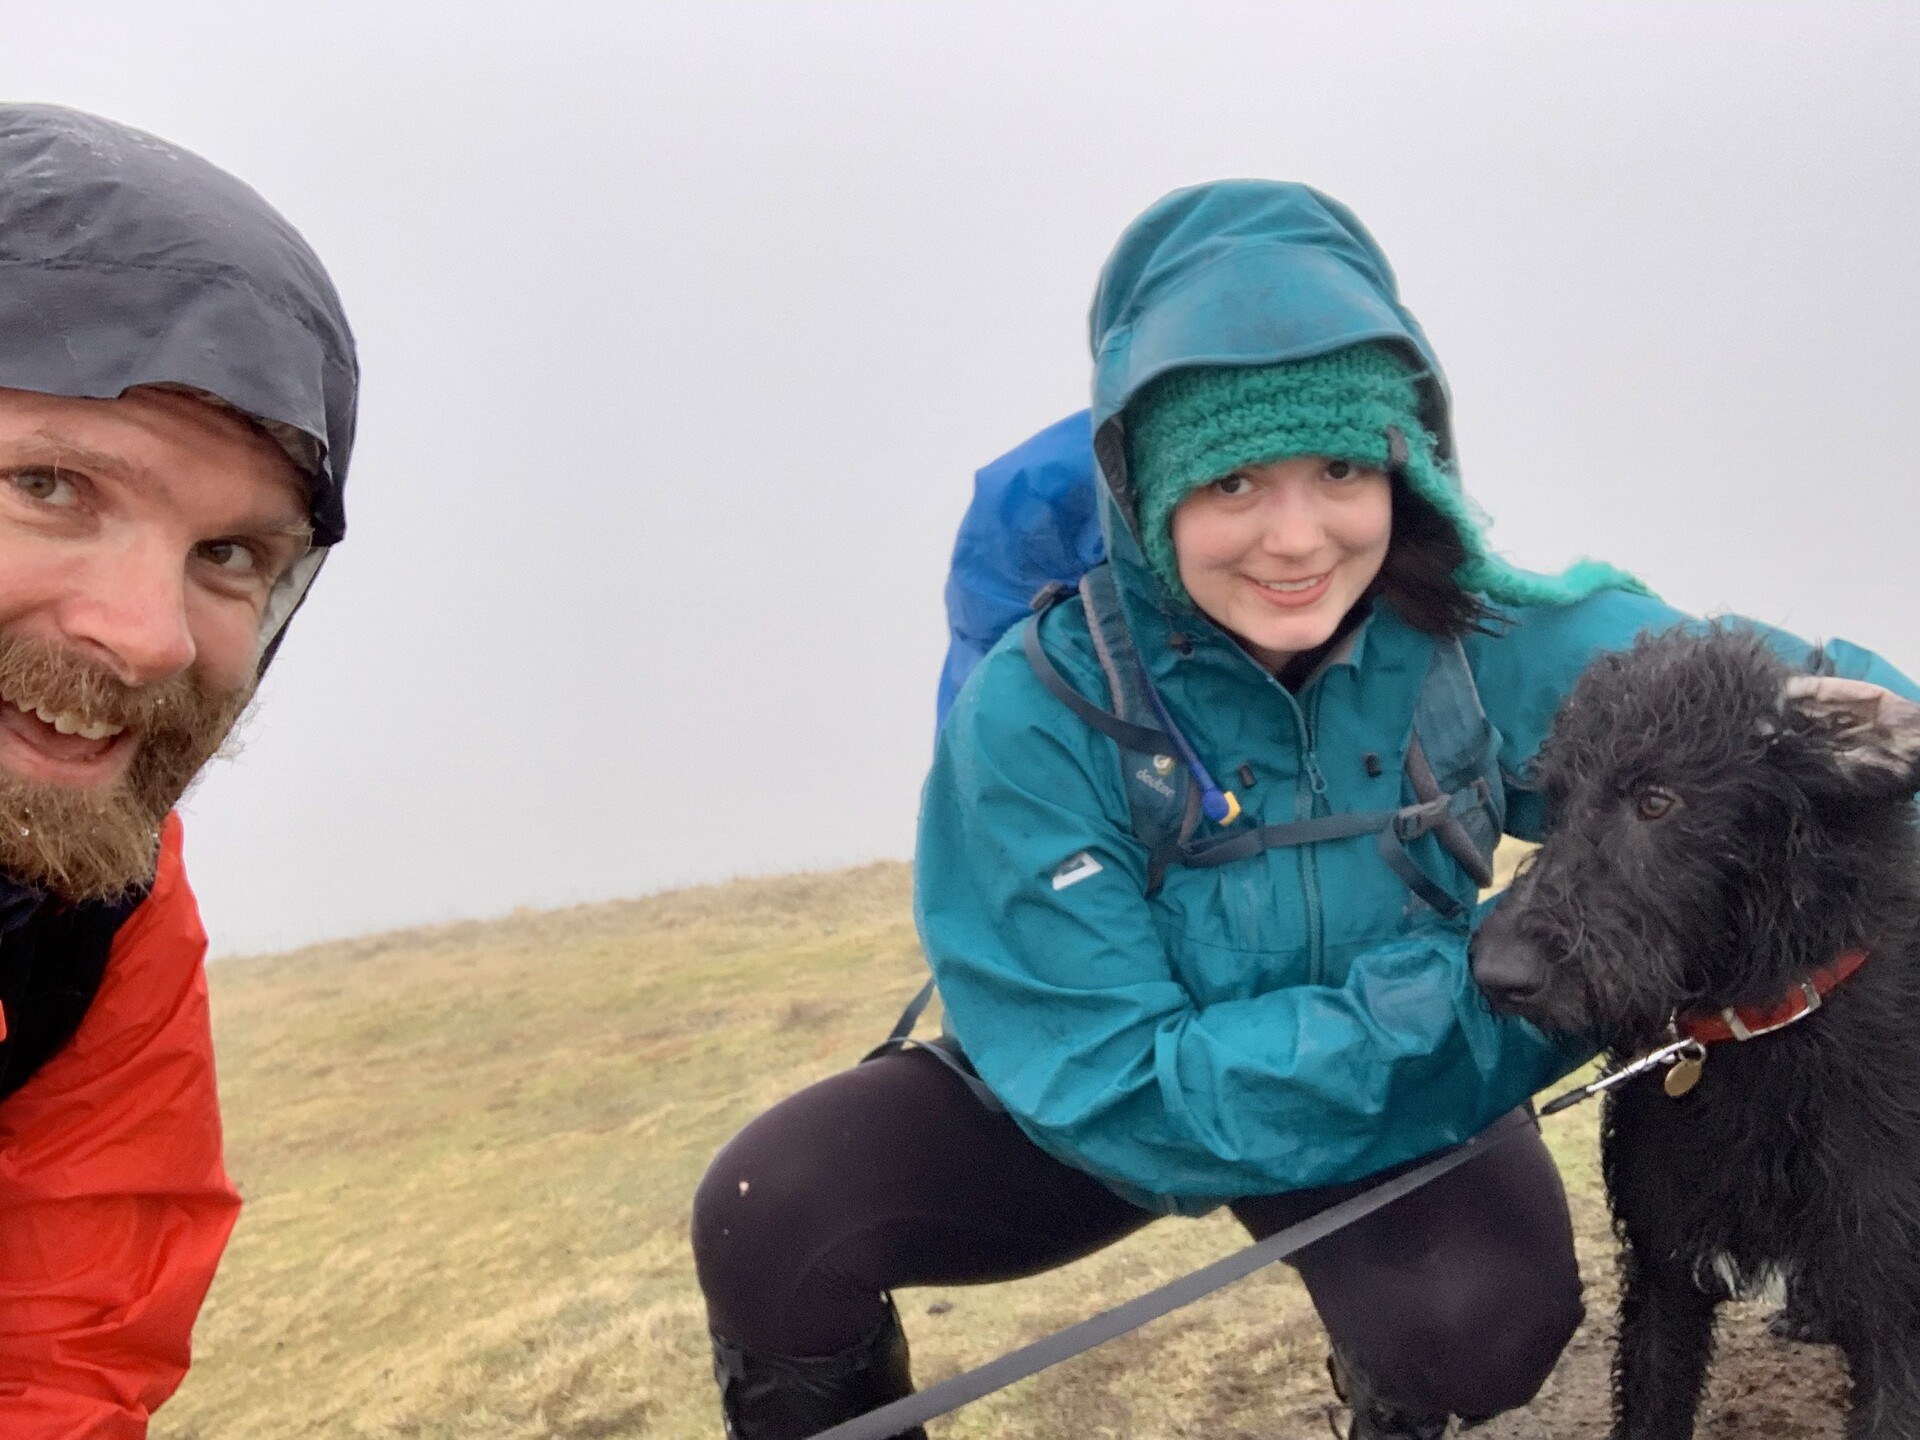 Ghyll, Sam, and I predictably wet on the side of Longlands